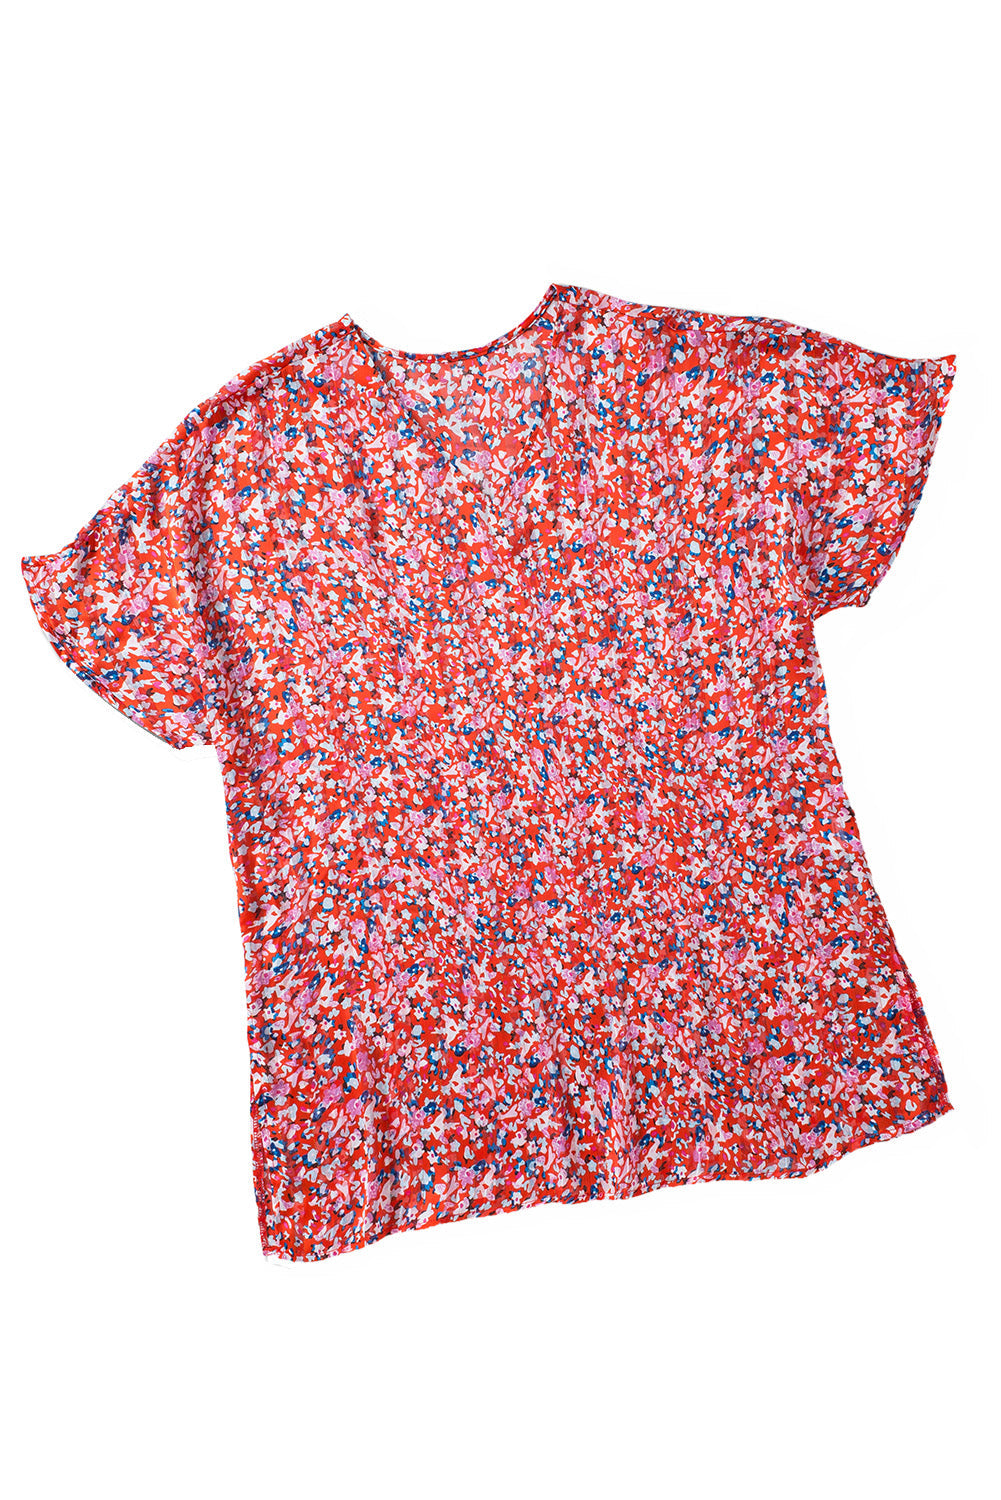 Red Abstract Floral Print Oversize Tunic Top